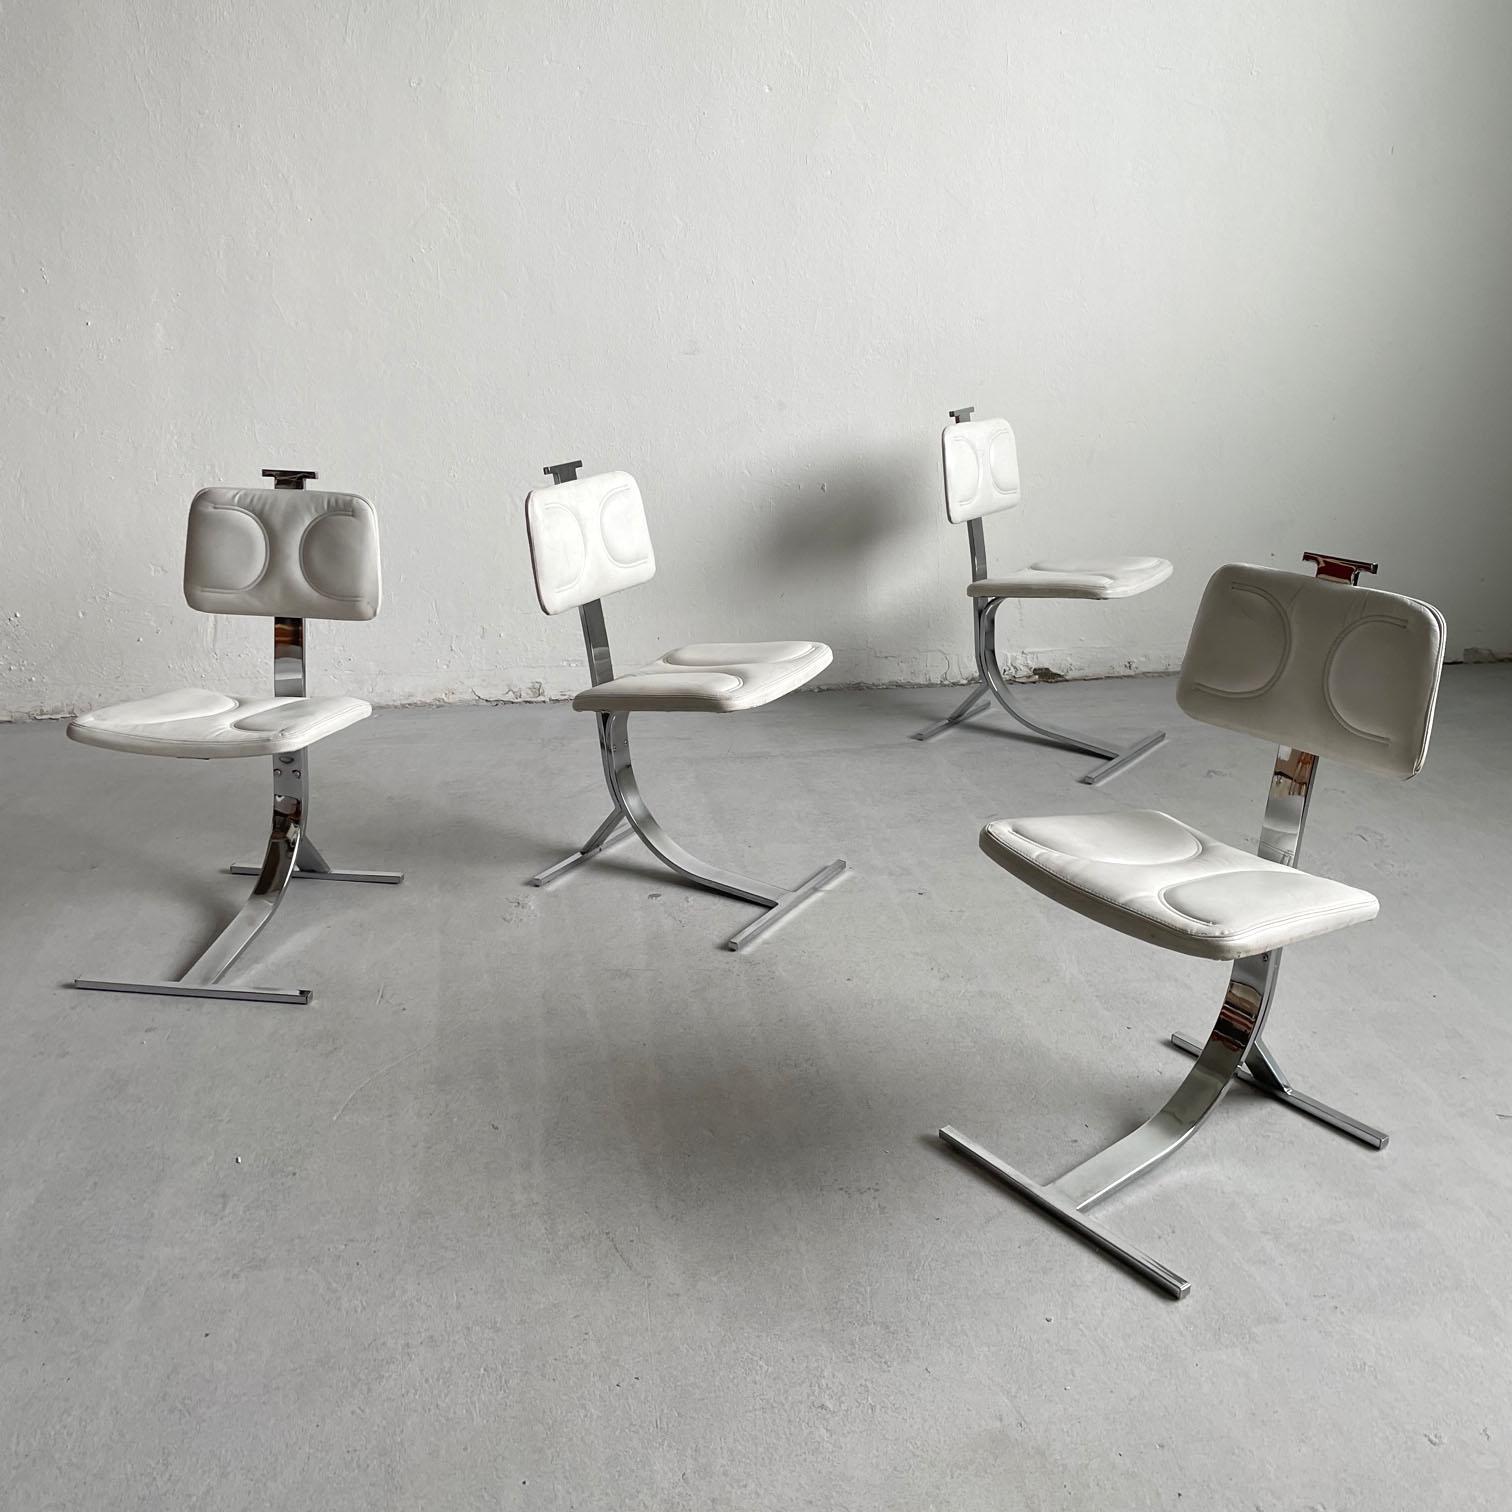 Set of 4 stunning sculptural dining chairs from the 1970s

The chairs feature a very solid frame with a cantilever curved form made of galvanized steel. The seats and the backrests are upholstered in a high quality soft white leatherette that has